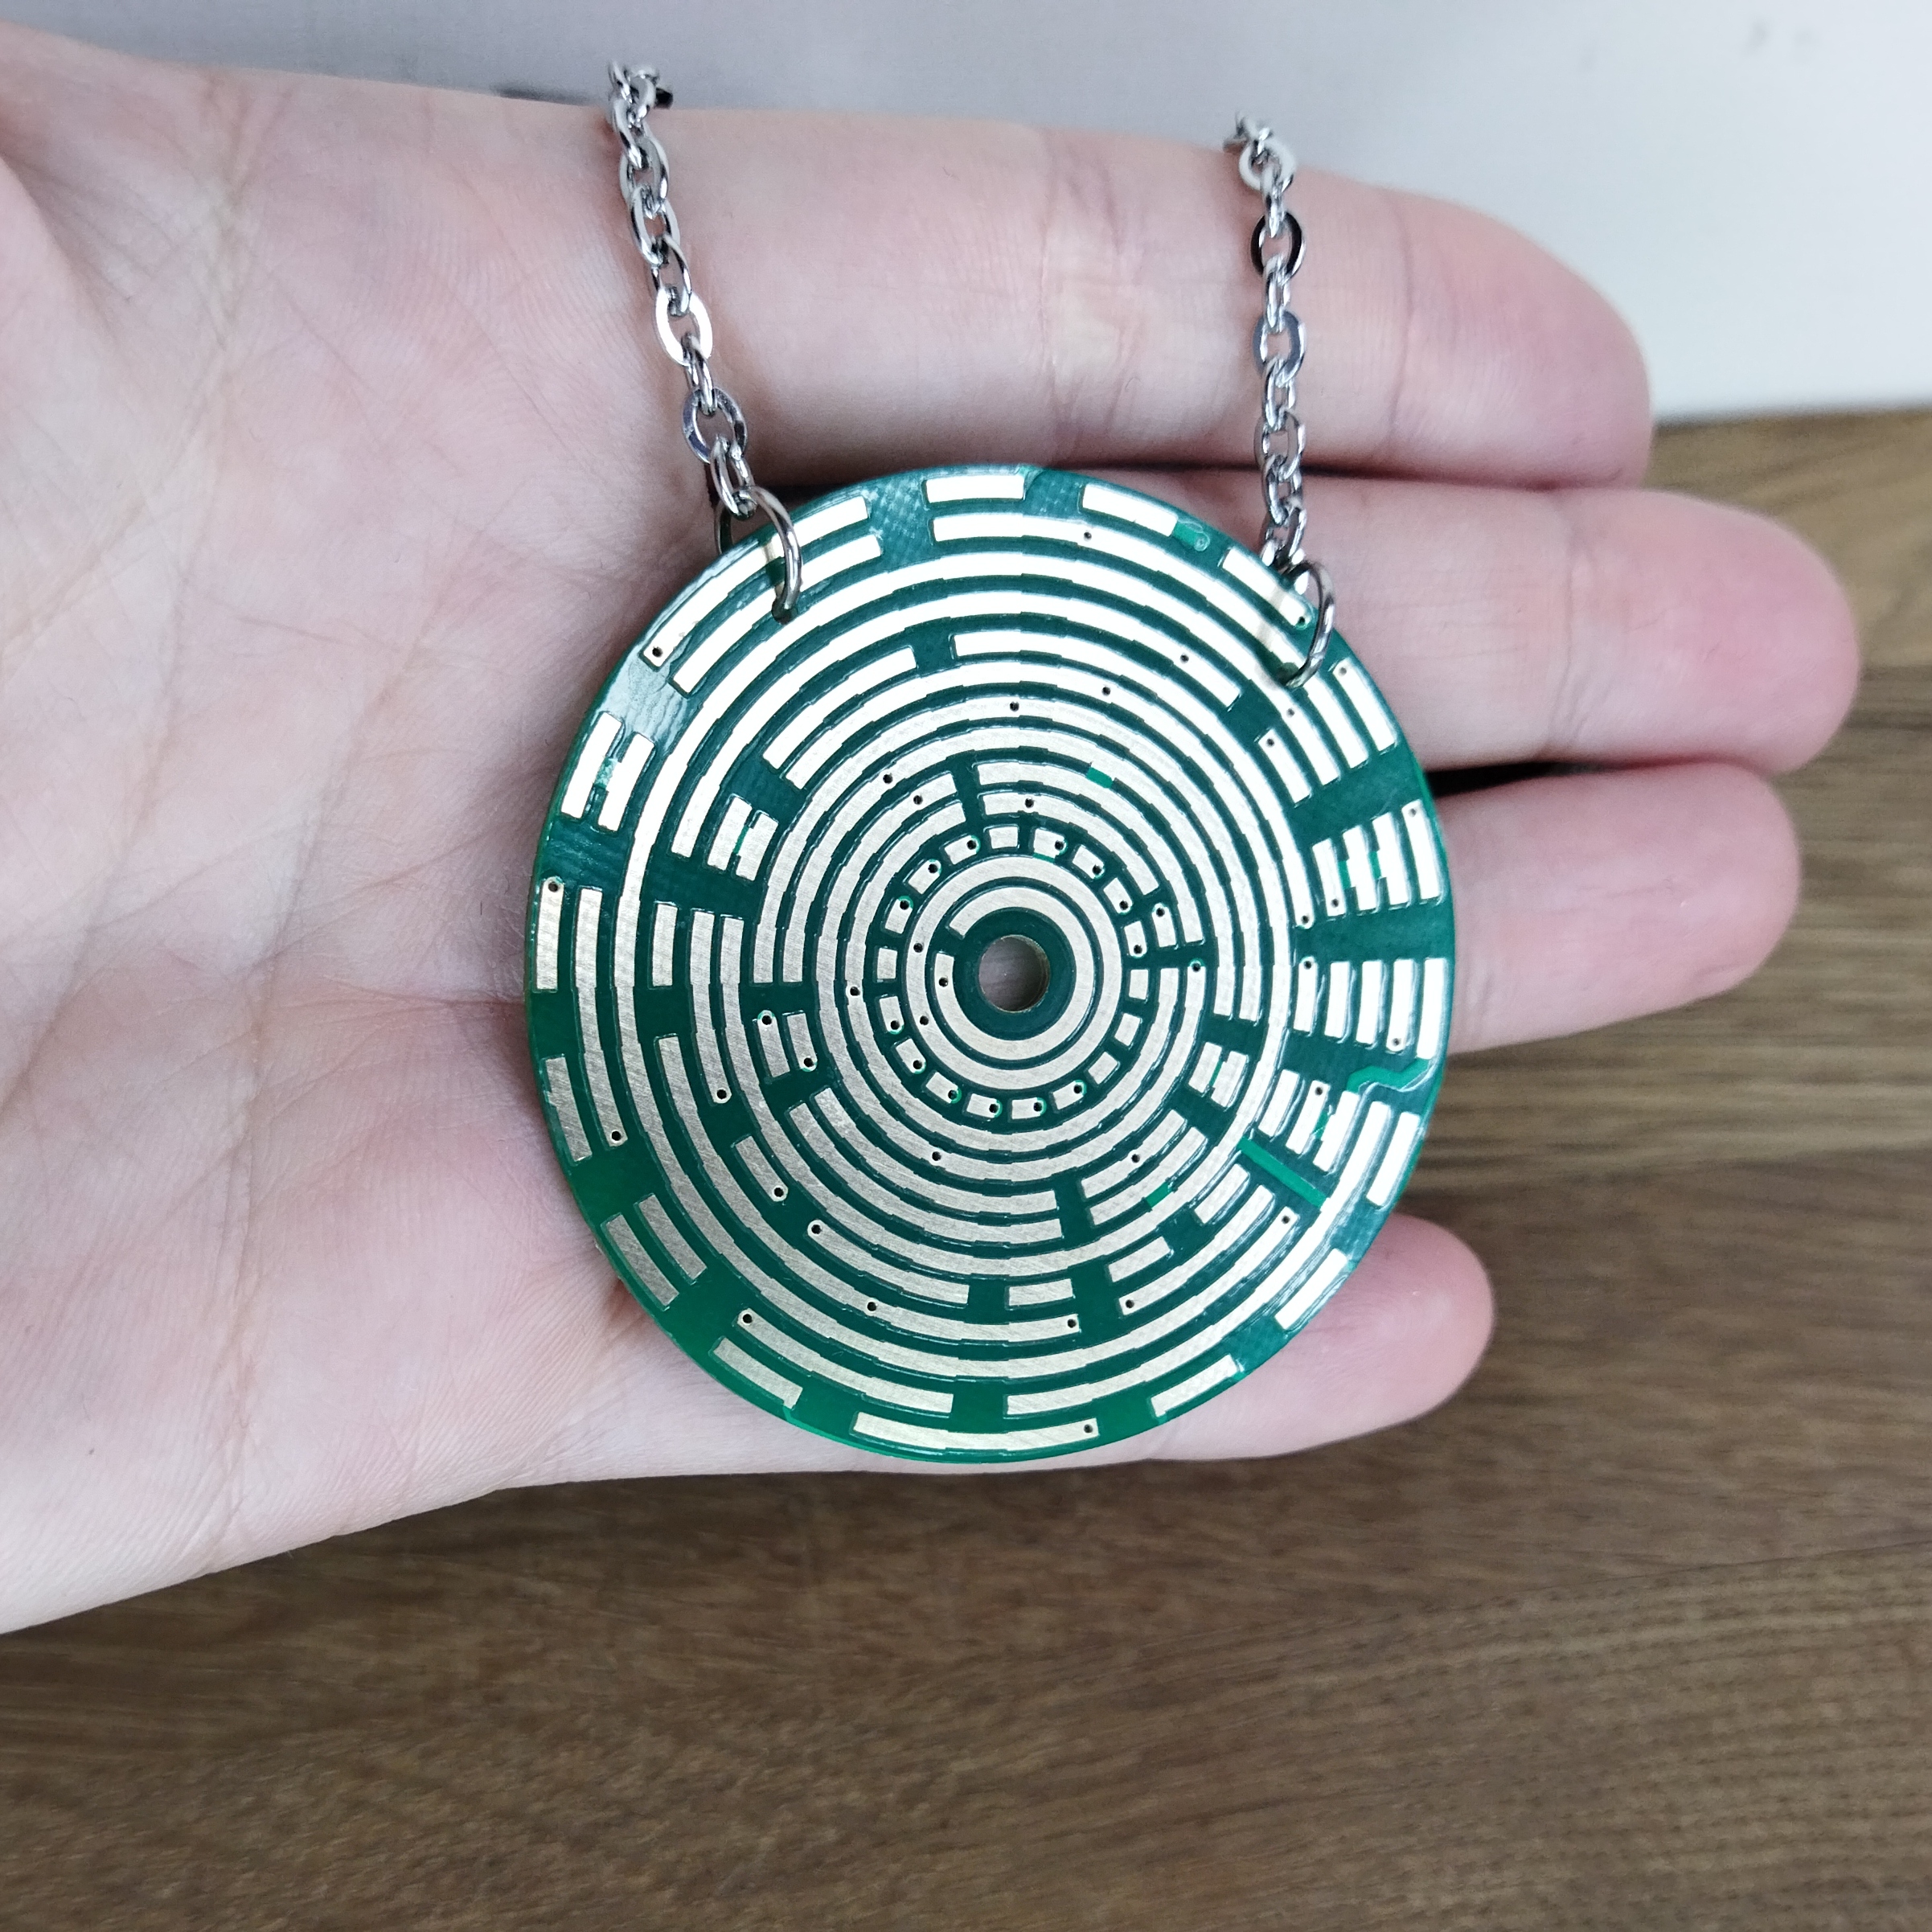 Circuit board necklace. Cyberpunk necklace with chain. Green circle futuristic pendant with chain